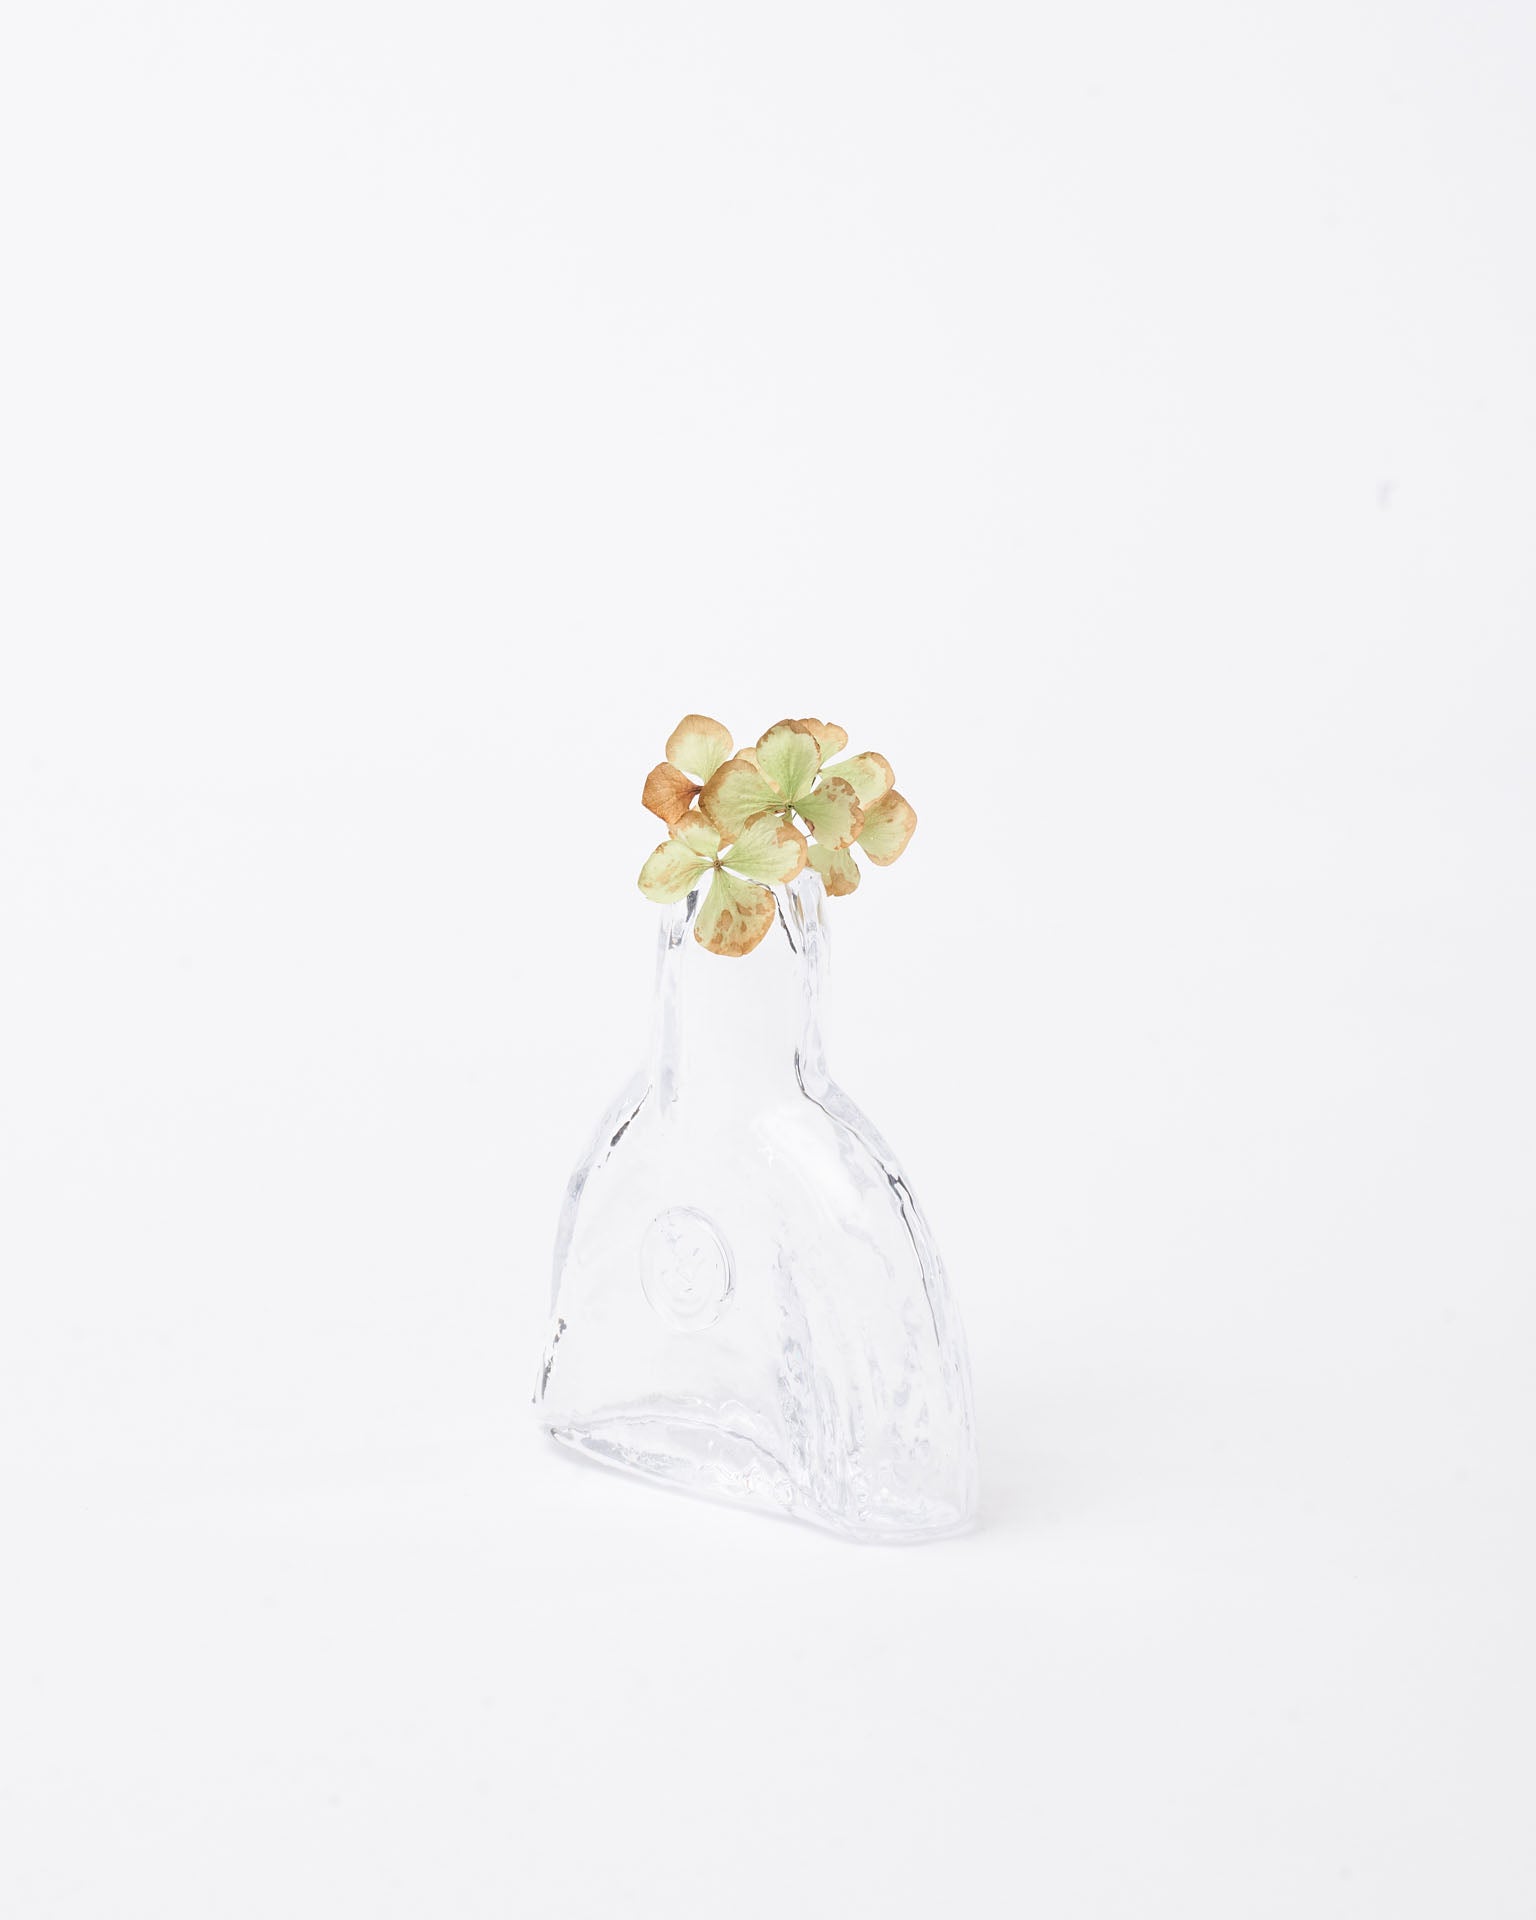 Modern small vase with hydrangea green in white background